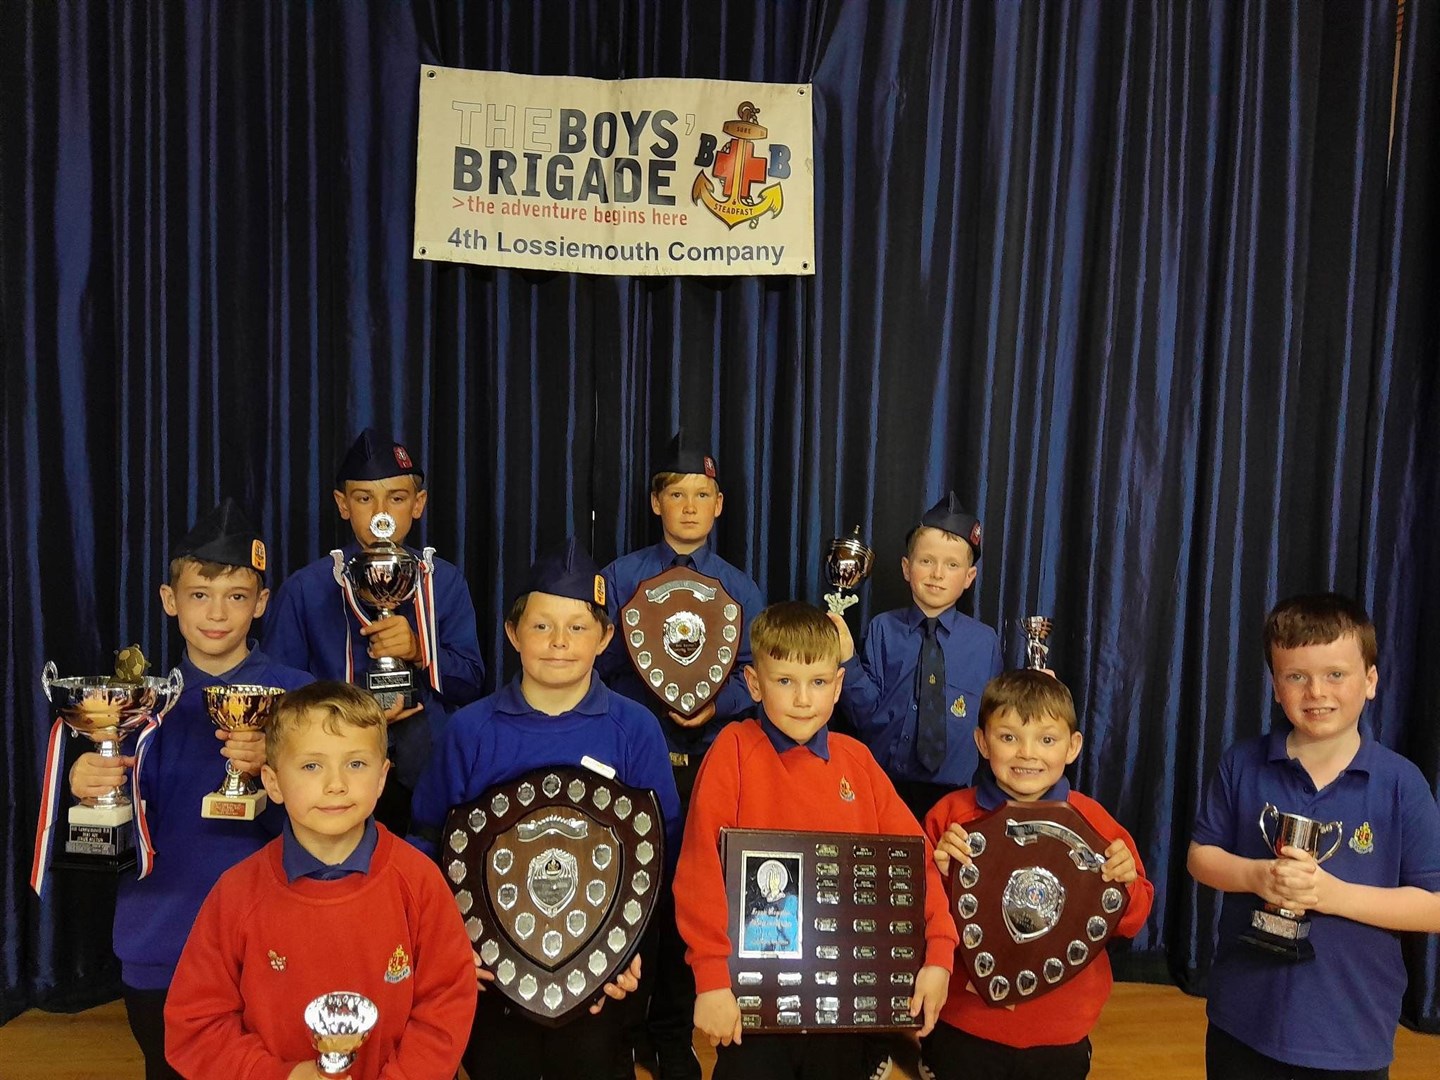 Some of the younger members of the 4th Lossiemouth Boys Brigade with their awards.